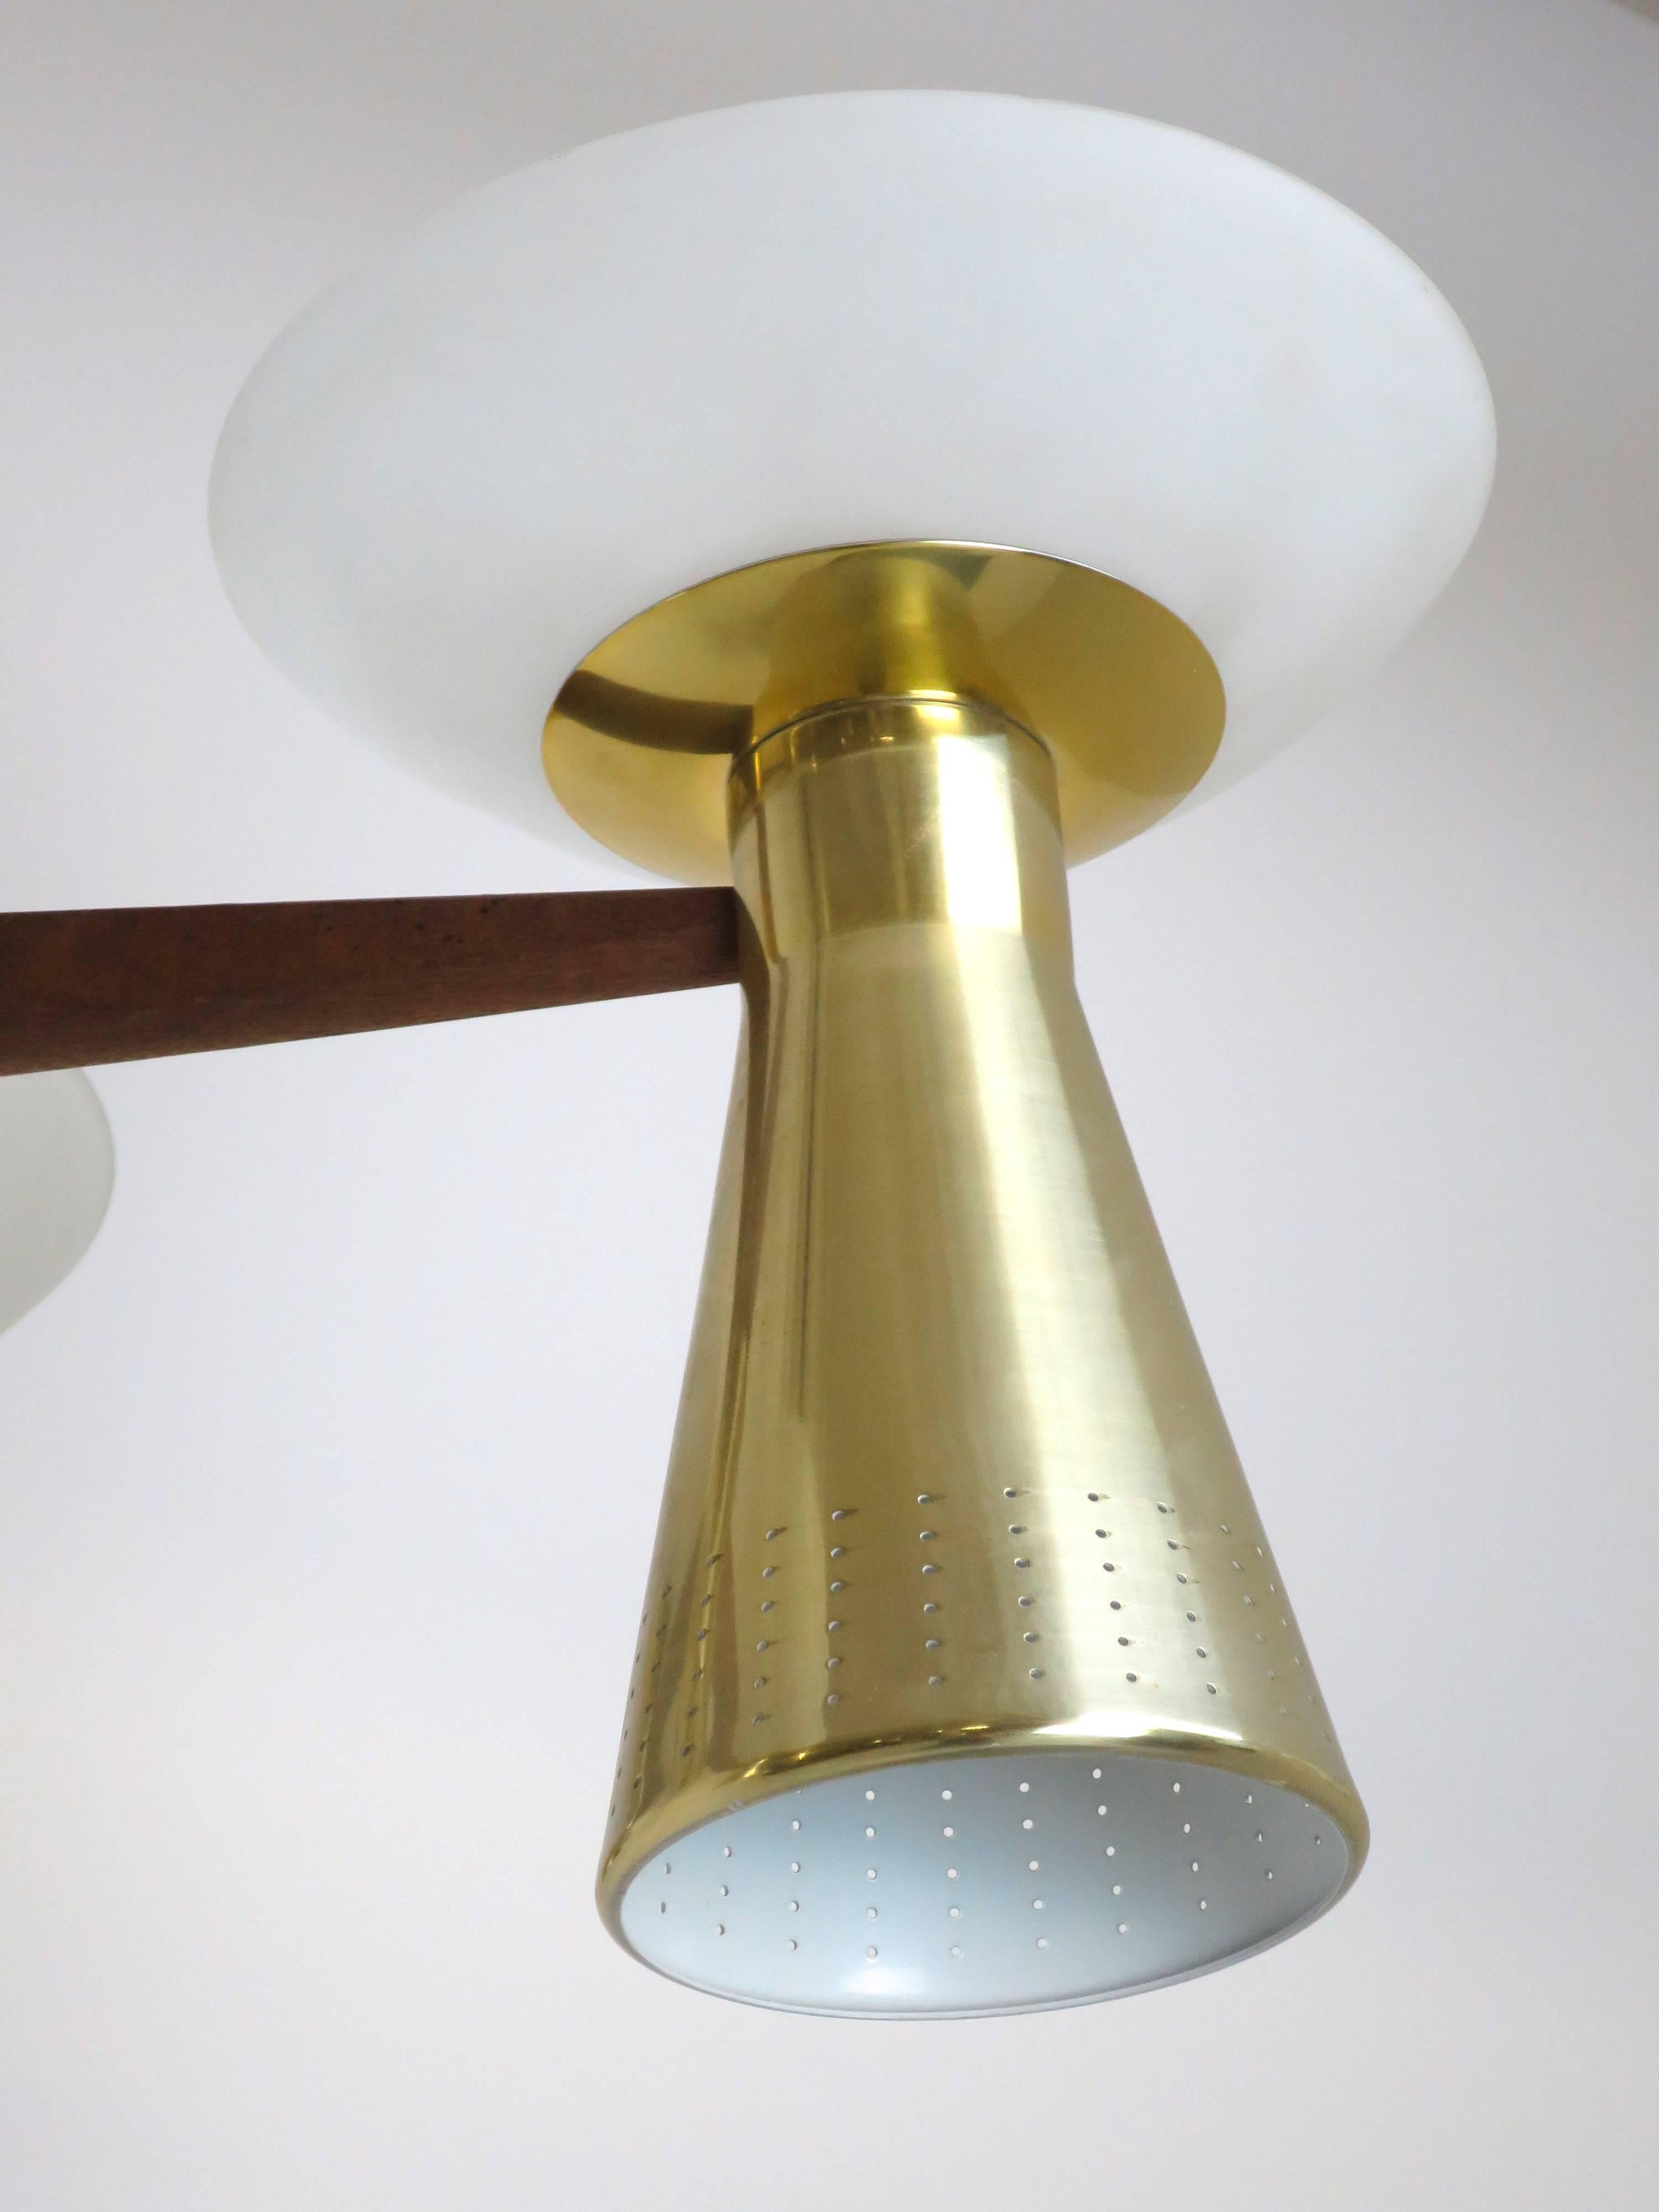 Frosted Modernist Perforated Brass and Walnut Chandelier, circa 1960s For Sale